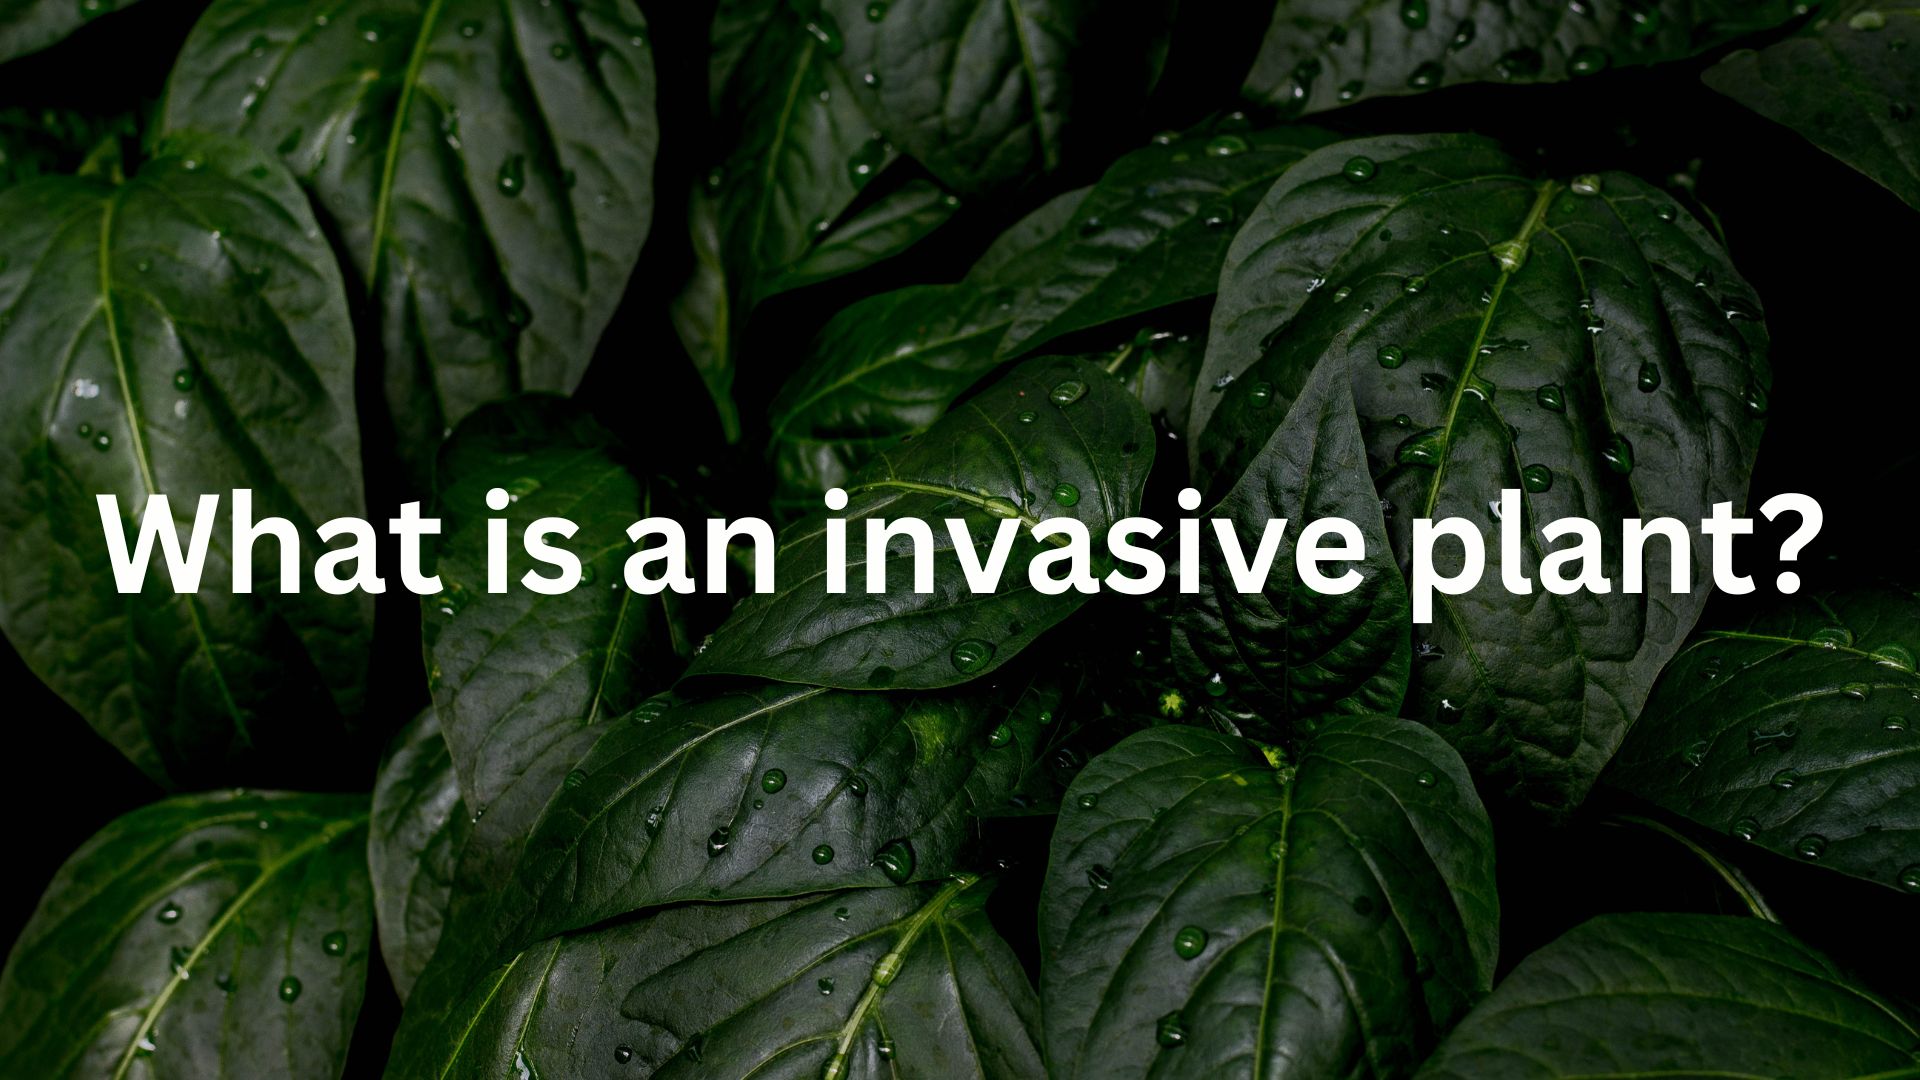 What is an invasive plant